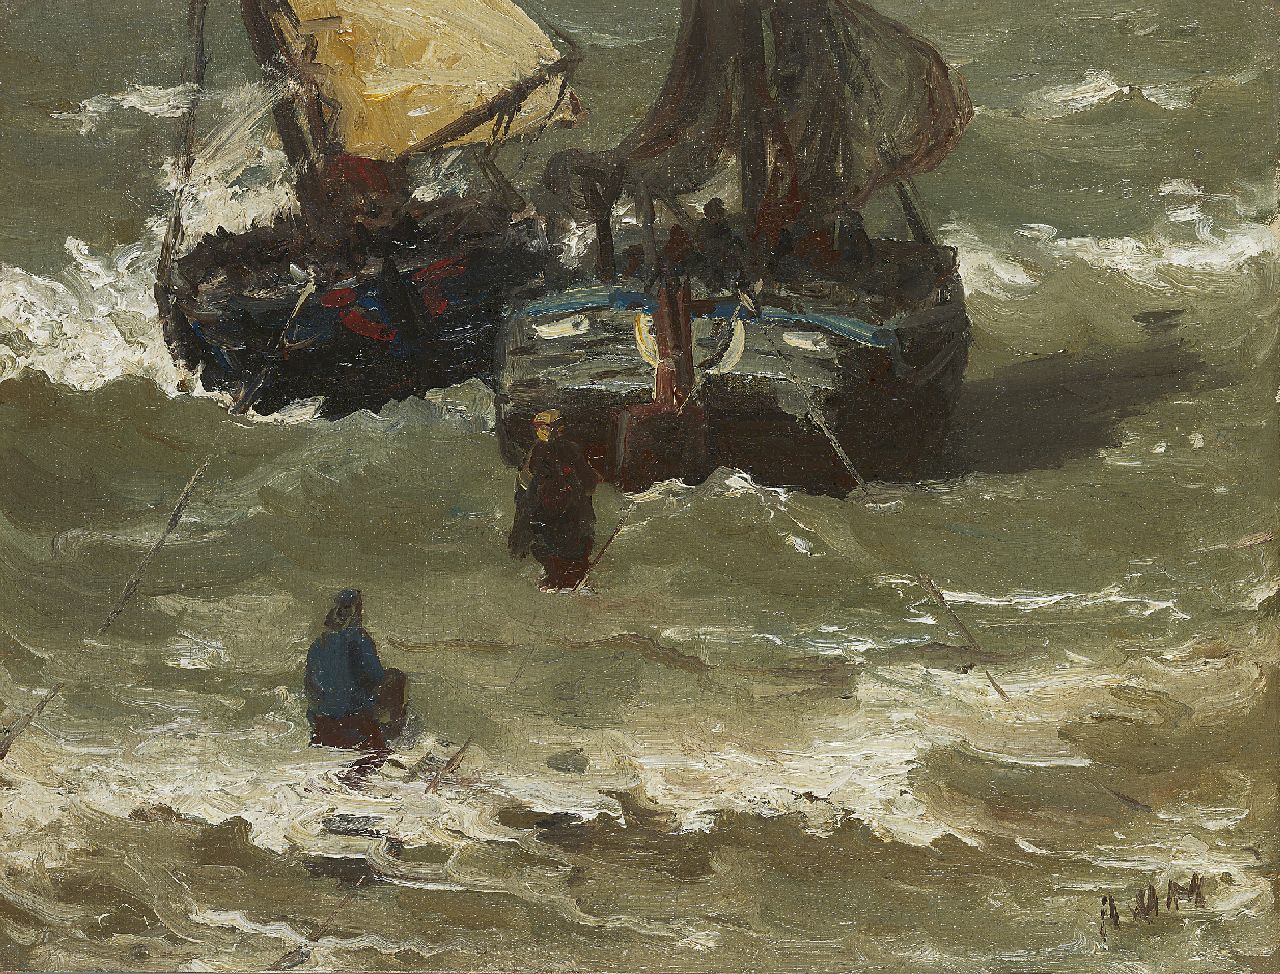 Mesdag H.W.  | Hendrik Willem Mesdag, Two bomschuiten in the surf, Öl auf Leinwand auf Holz 29,2 x 38,5 cm, signed l.r. with initials